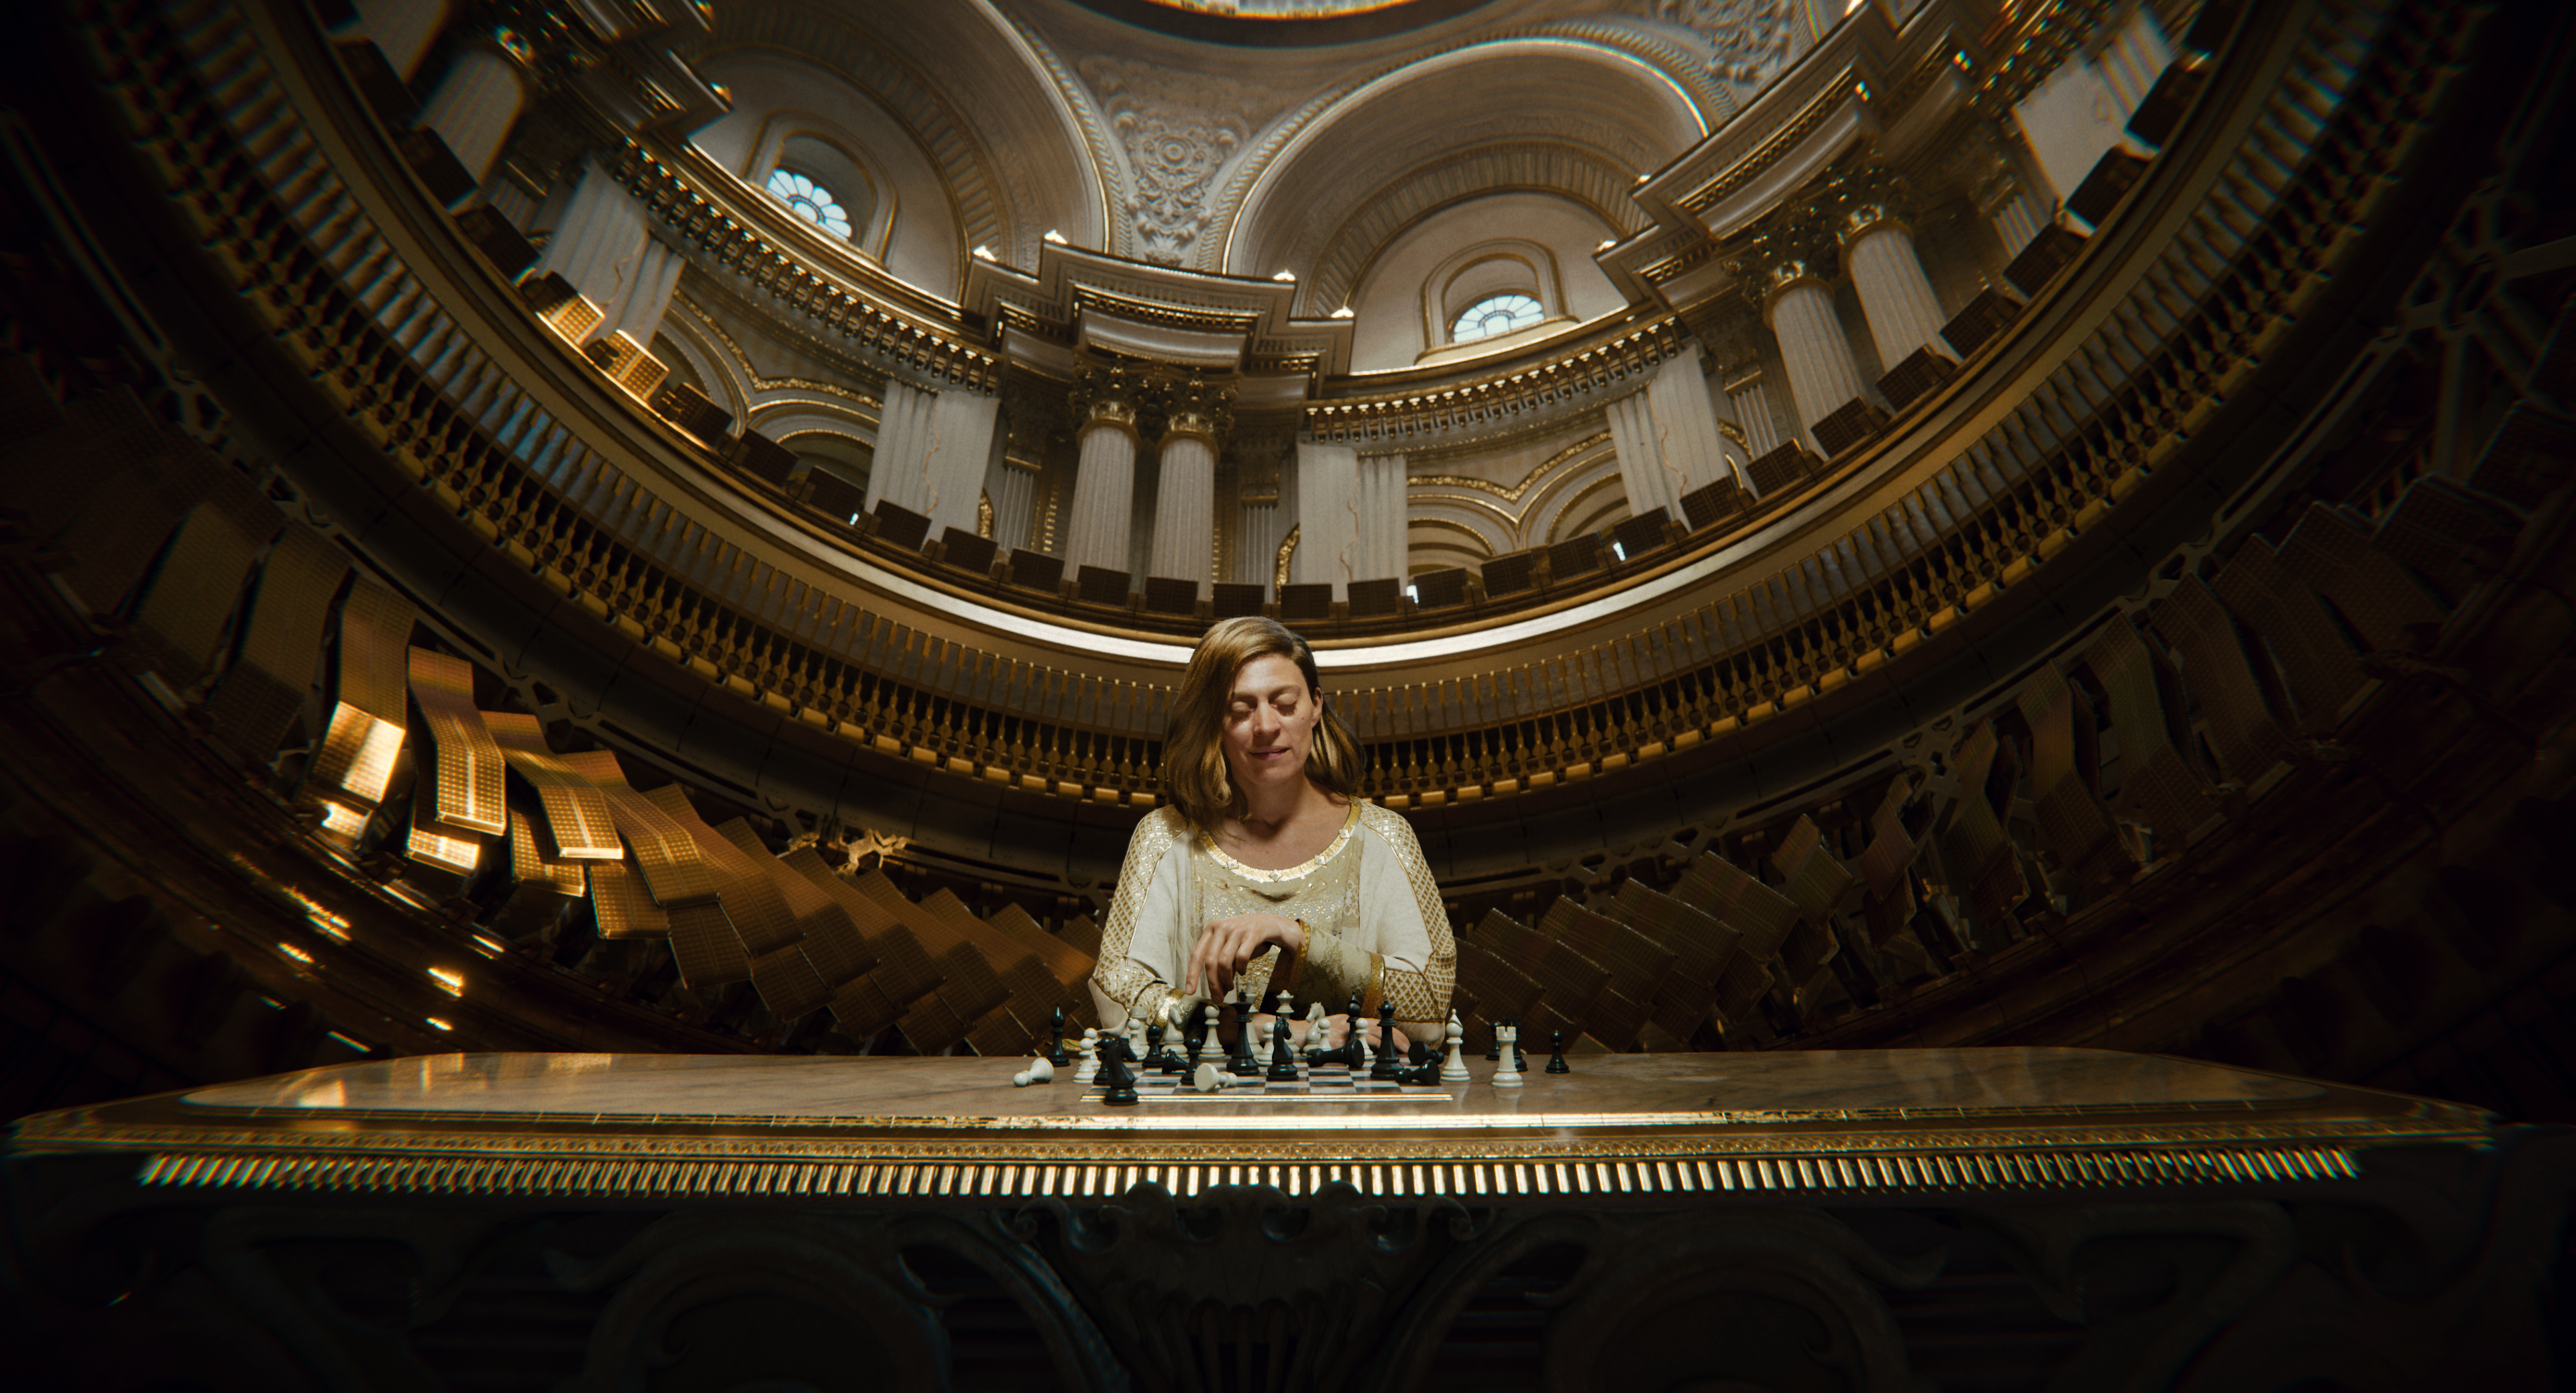 A woman playing chess in a palace, from Unity's "Enemies"